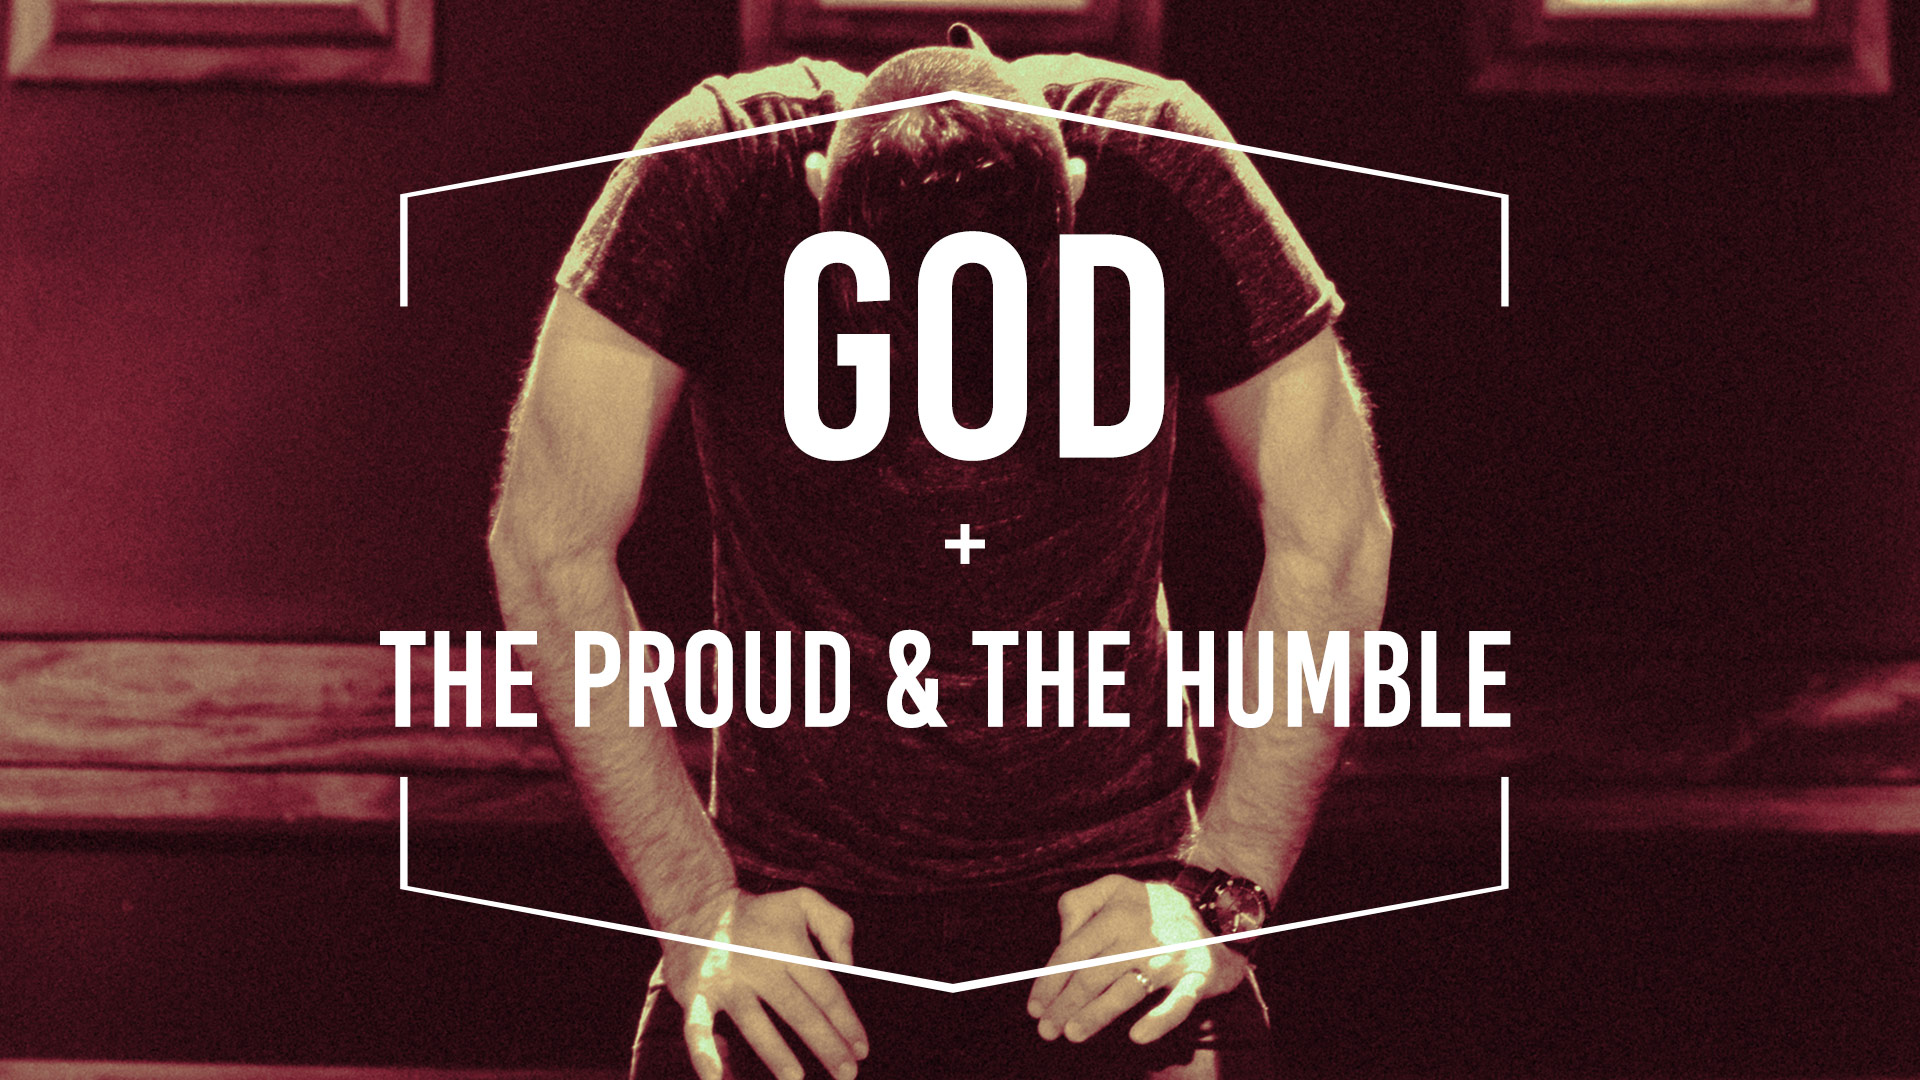 God, The Proud, and The Humble